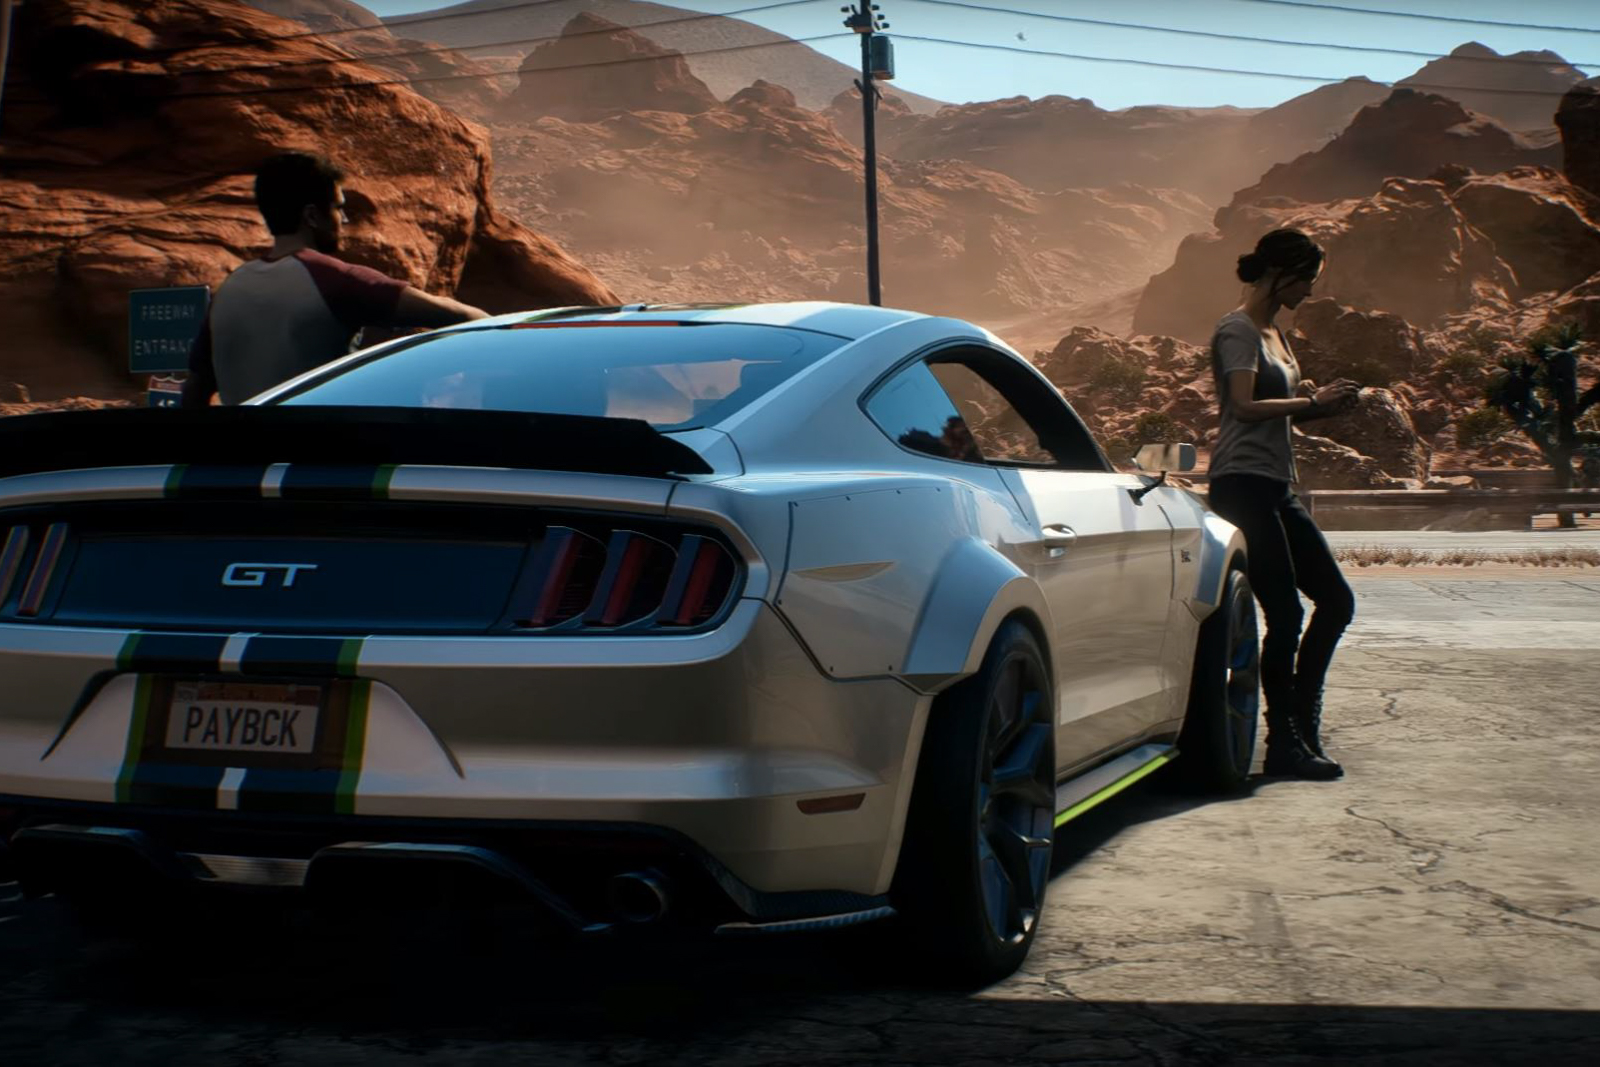 Мустанг payback. Ford Mustang NFS Payback. Need for Speed Payback Ford Mustang. NFS Payback Форд Мустанг. Ford Mustang RTR 2015 Payback.